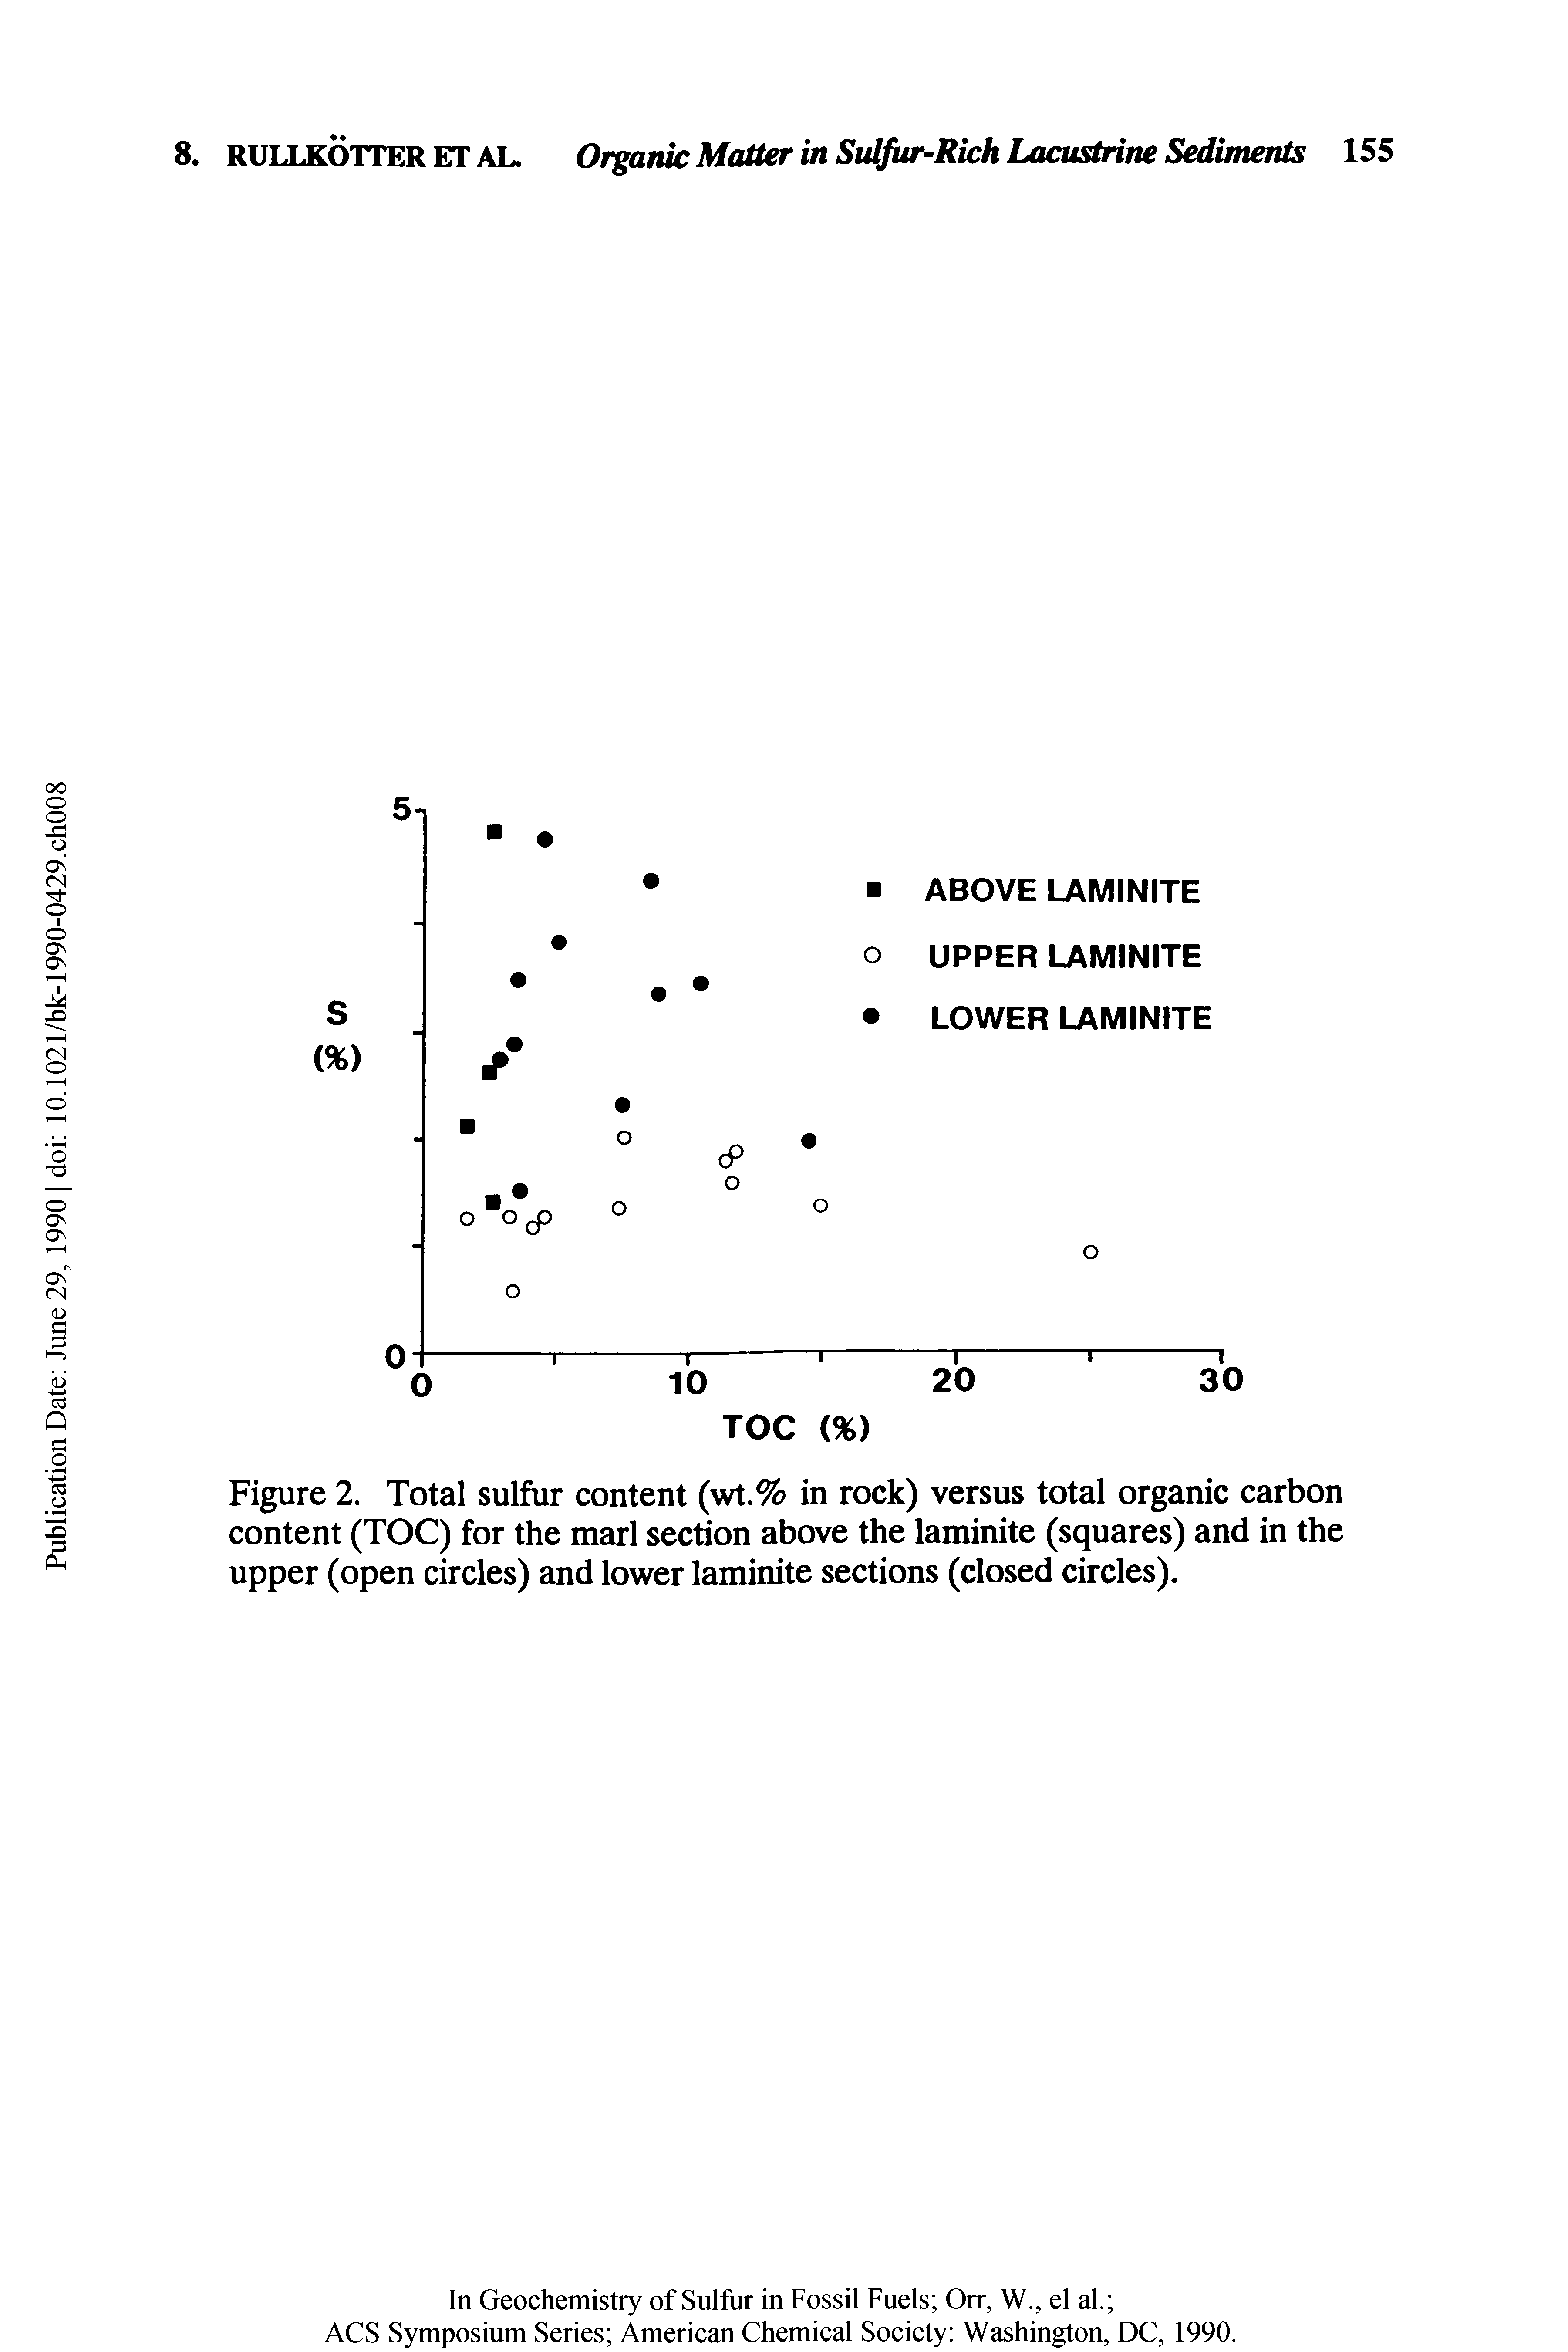 Figure 2. Total sulfur content (wt.% in rock) versus total organic carbon content (TOC) for the marl section above the laminite (squares) and in the upper (open circles) and lower laminite sections (closed circles).